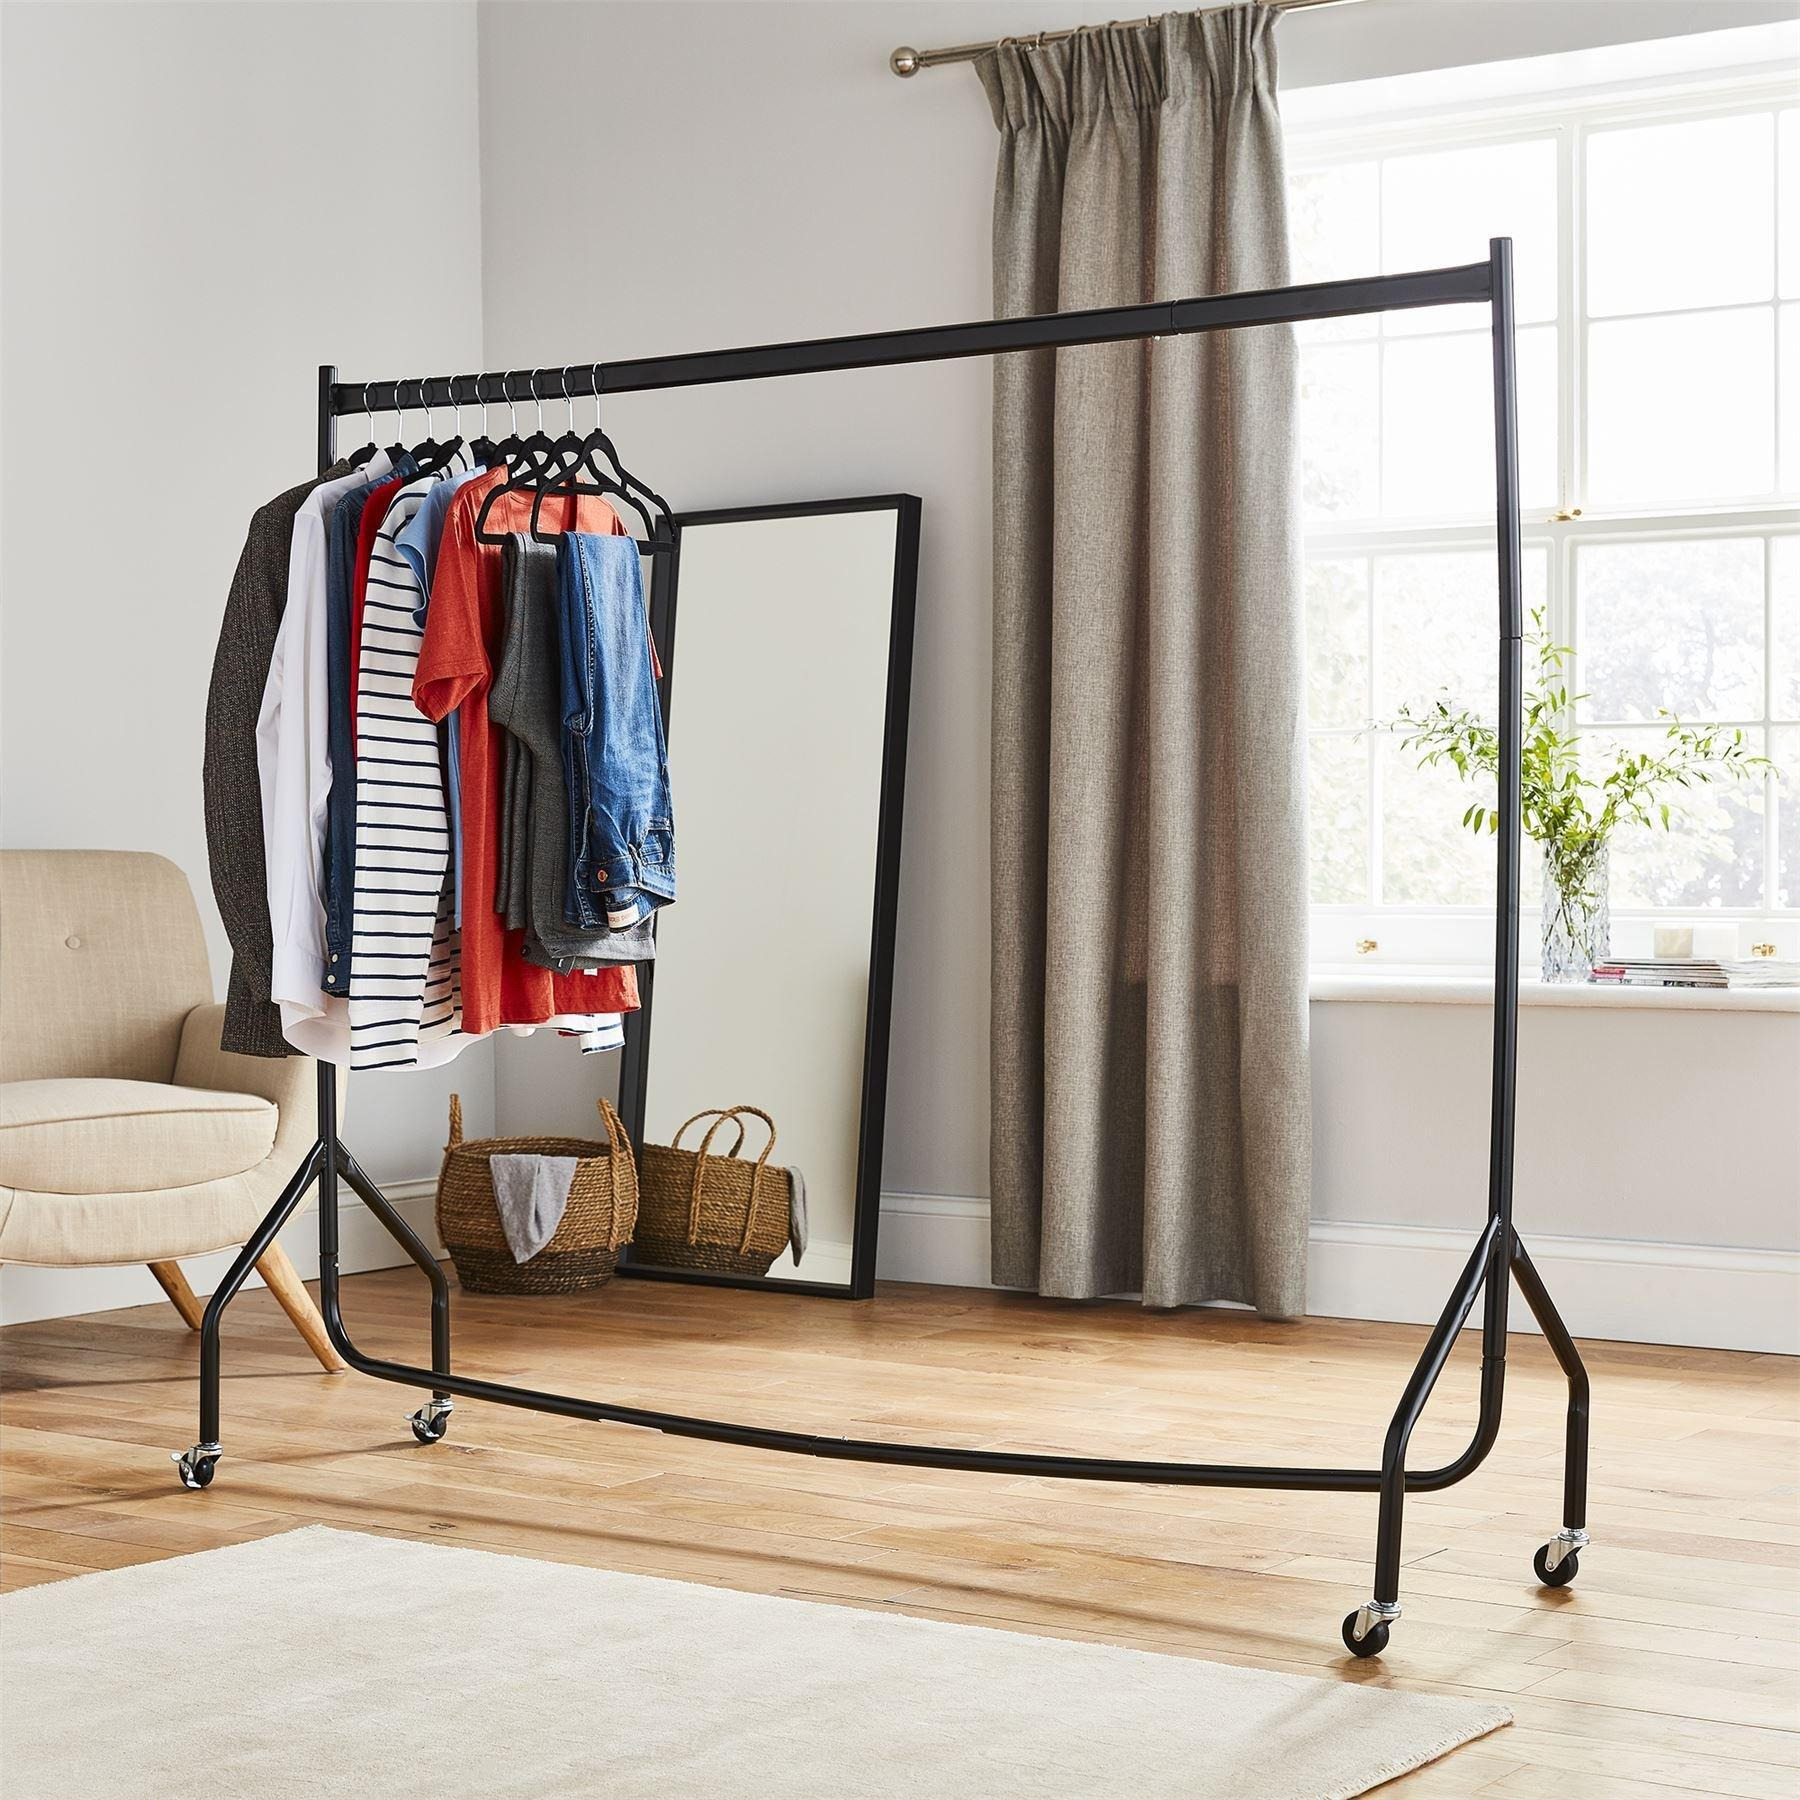 Clothes Rail Superior Heavy Duty Rack With Wheels 6FT Long x 5FT Tall - image 1